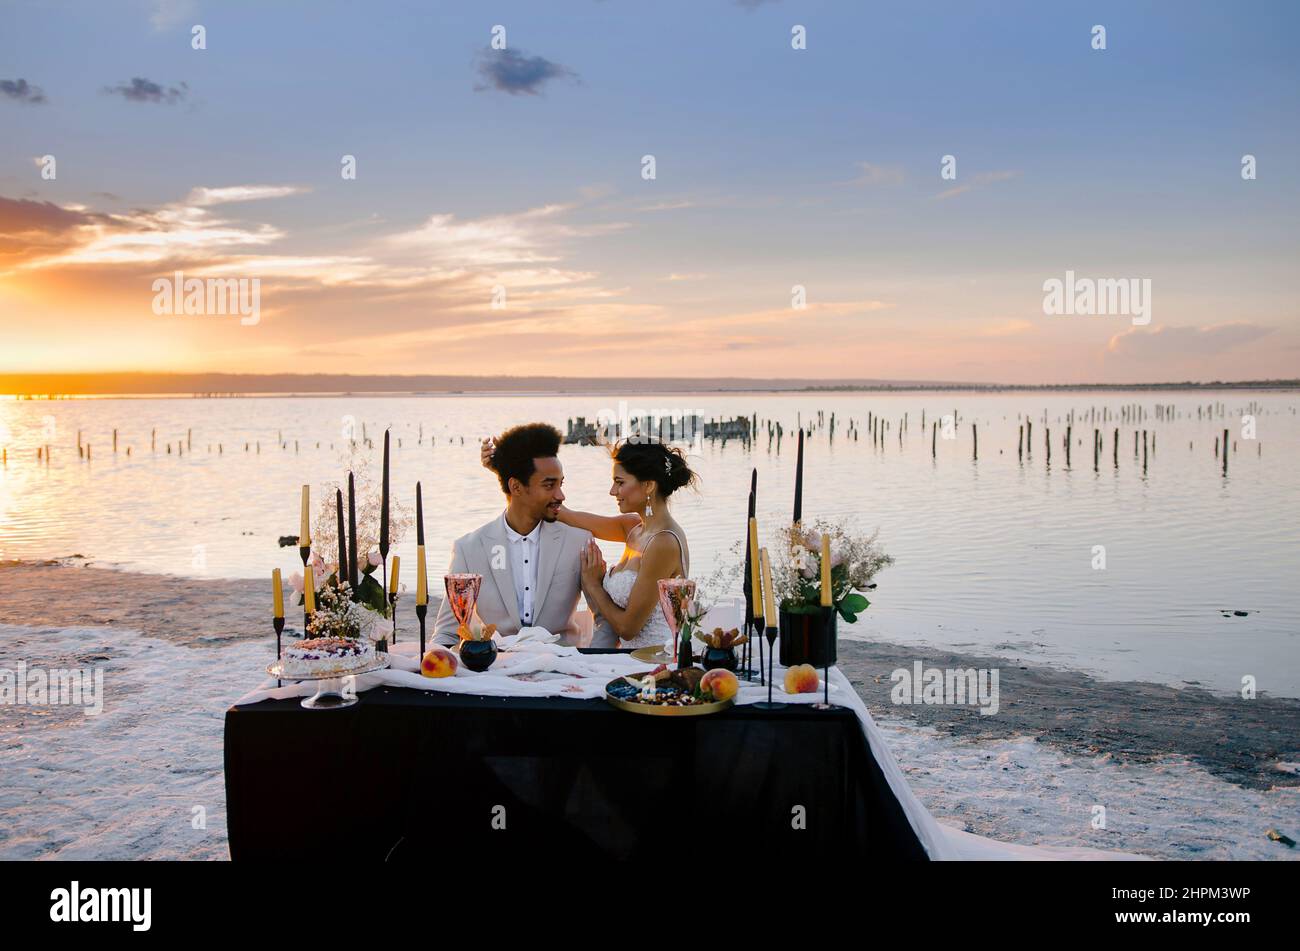 A beautiful romantic couple on an important day for them at sunset outside the city. Concept - love, romance, tenderness. Stock Photo